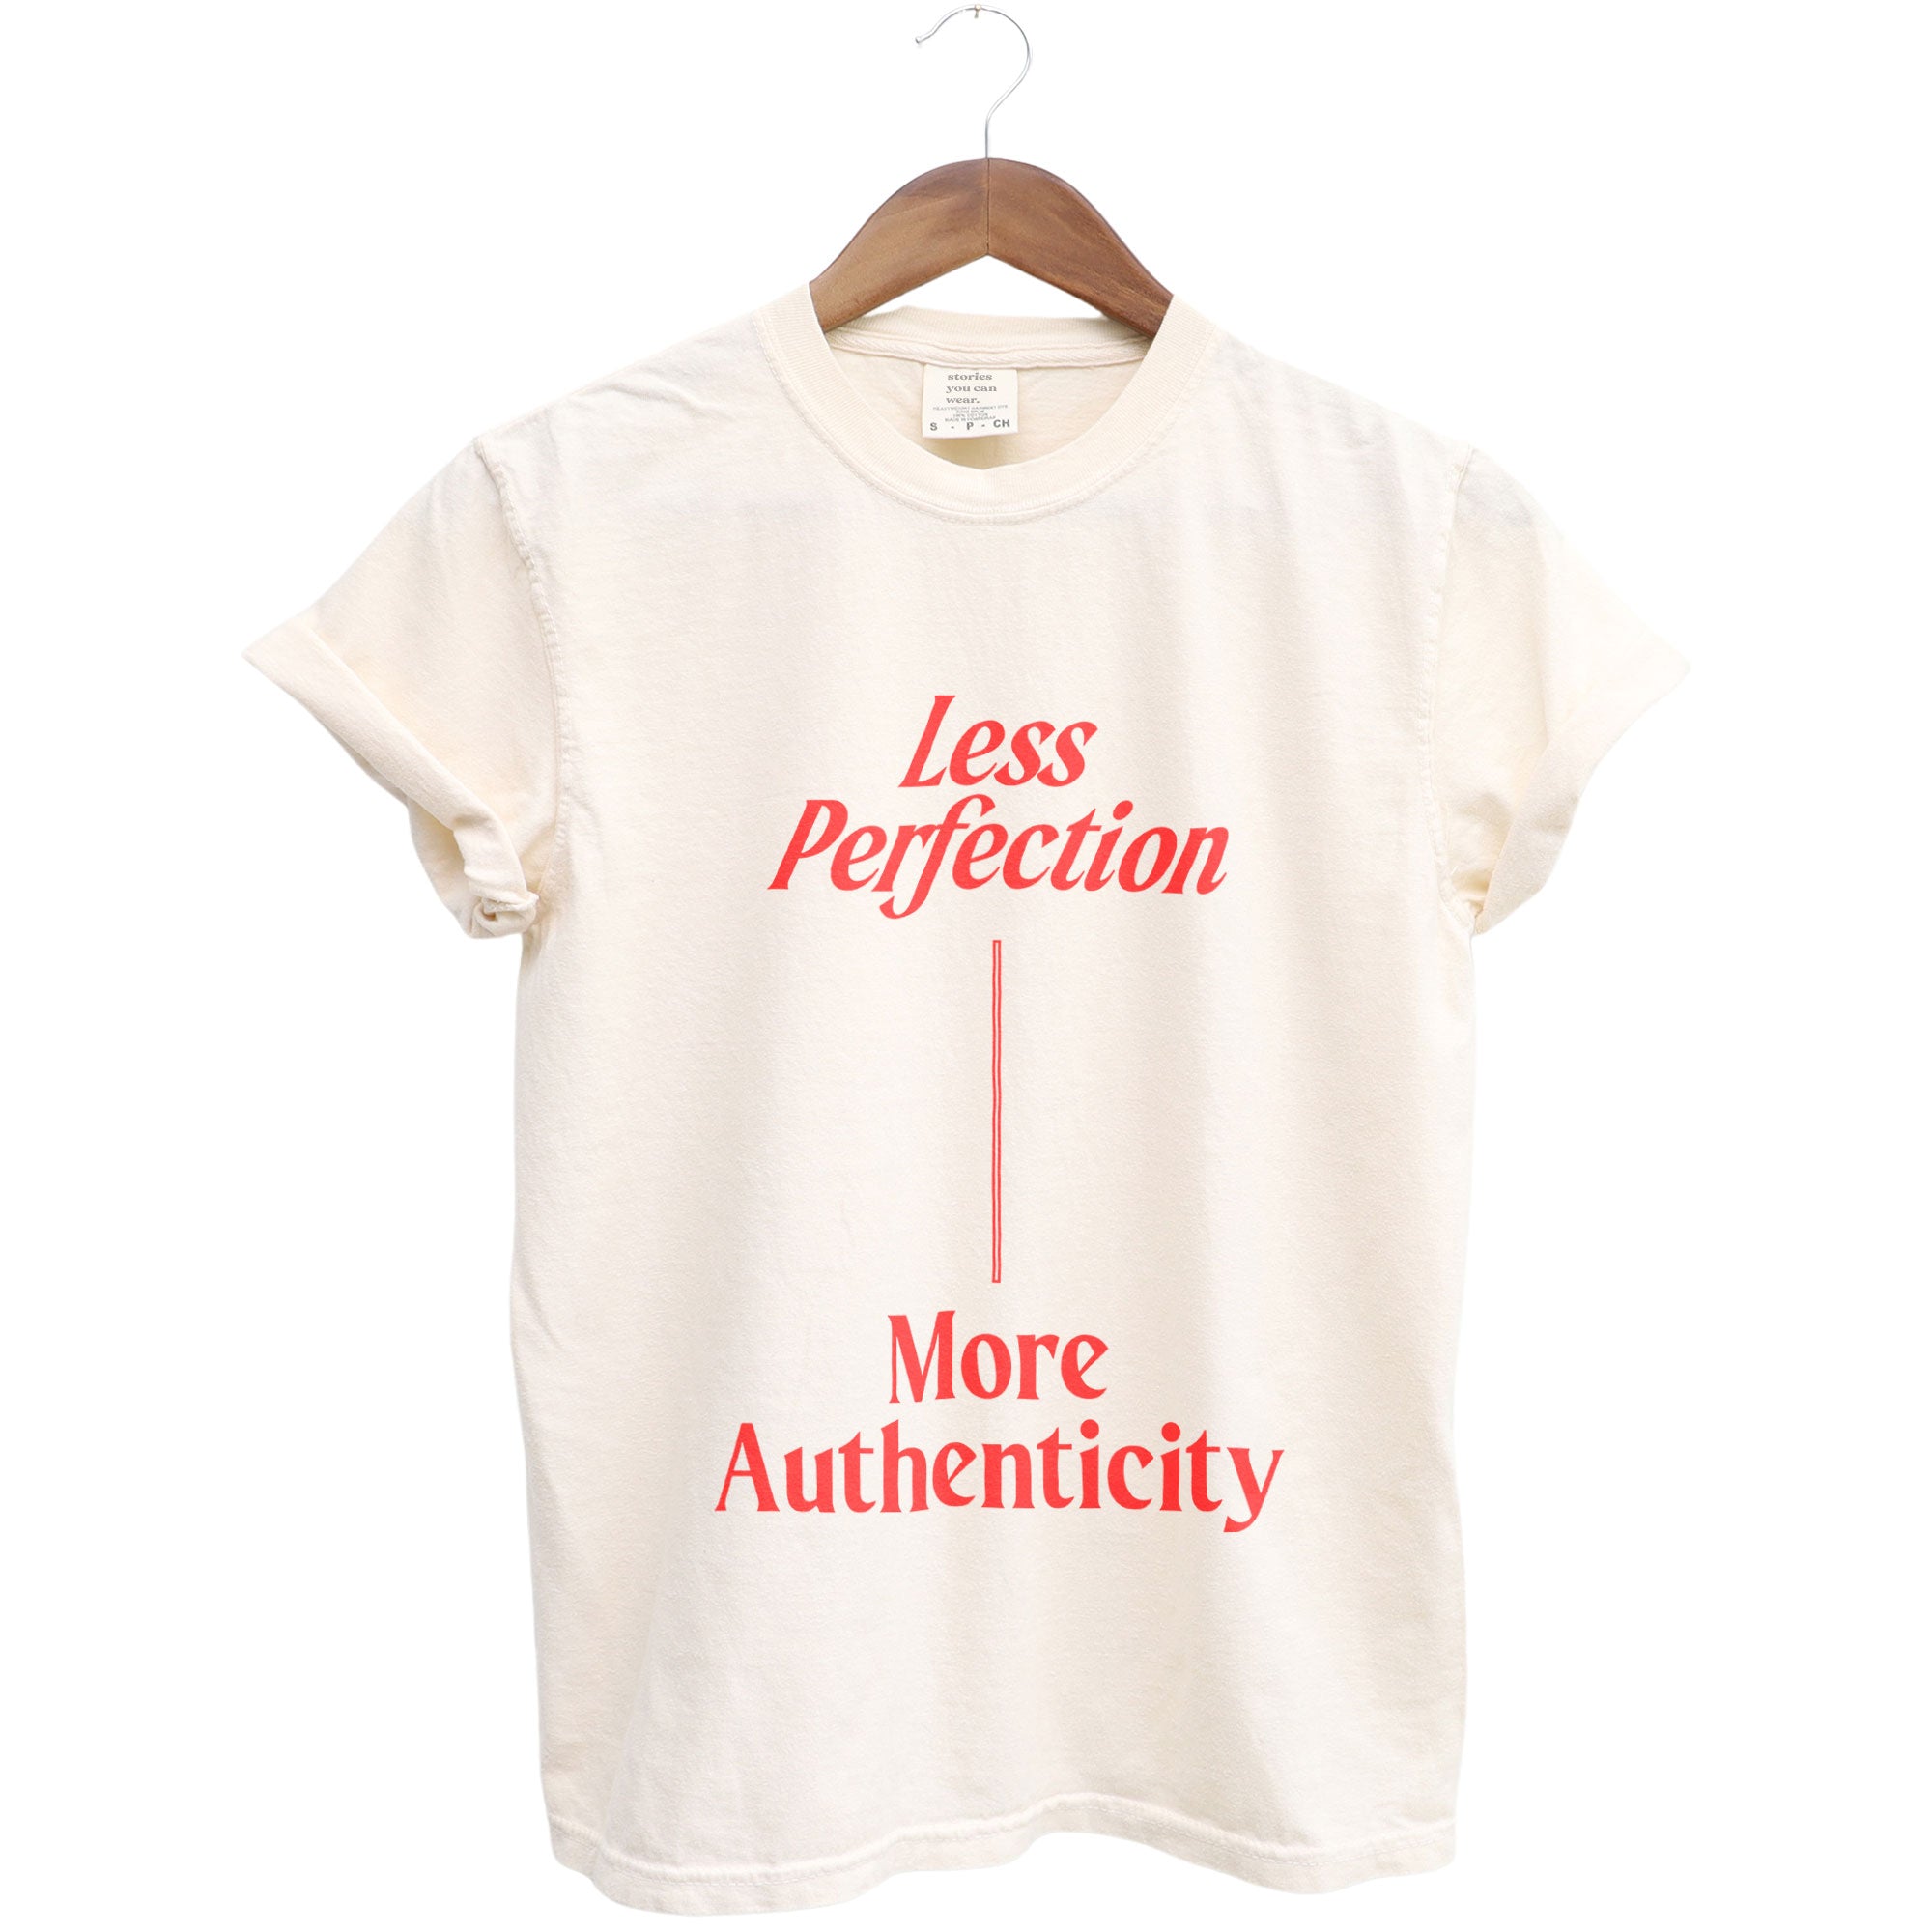 Less Perfection More Authenticity Garment-Dyed Tee